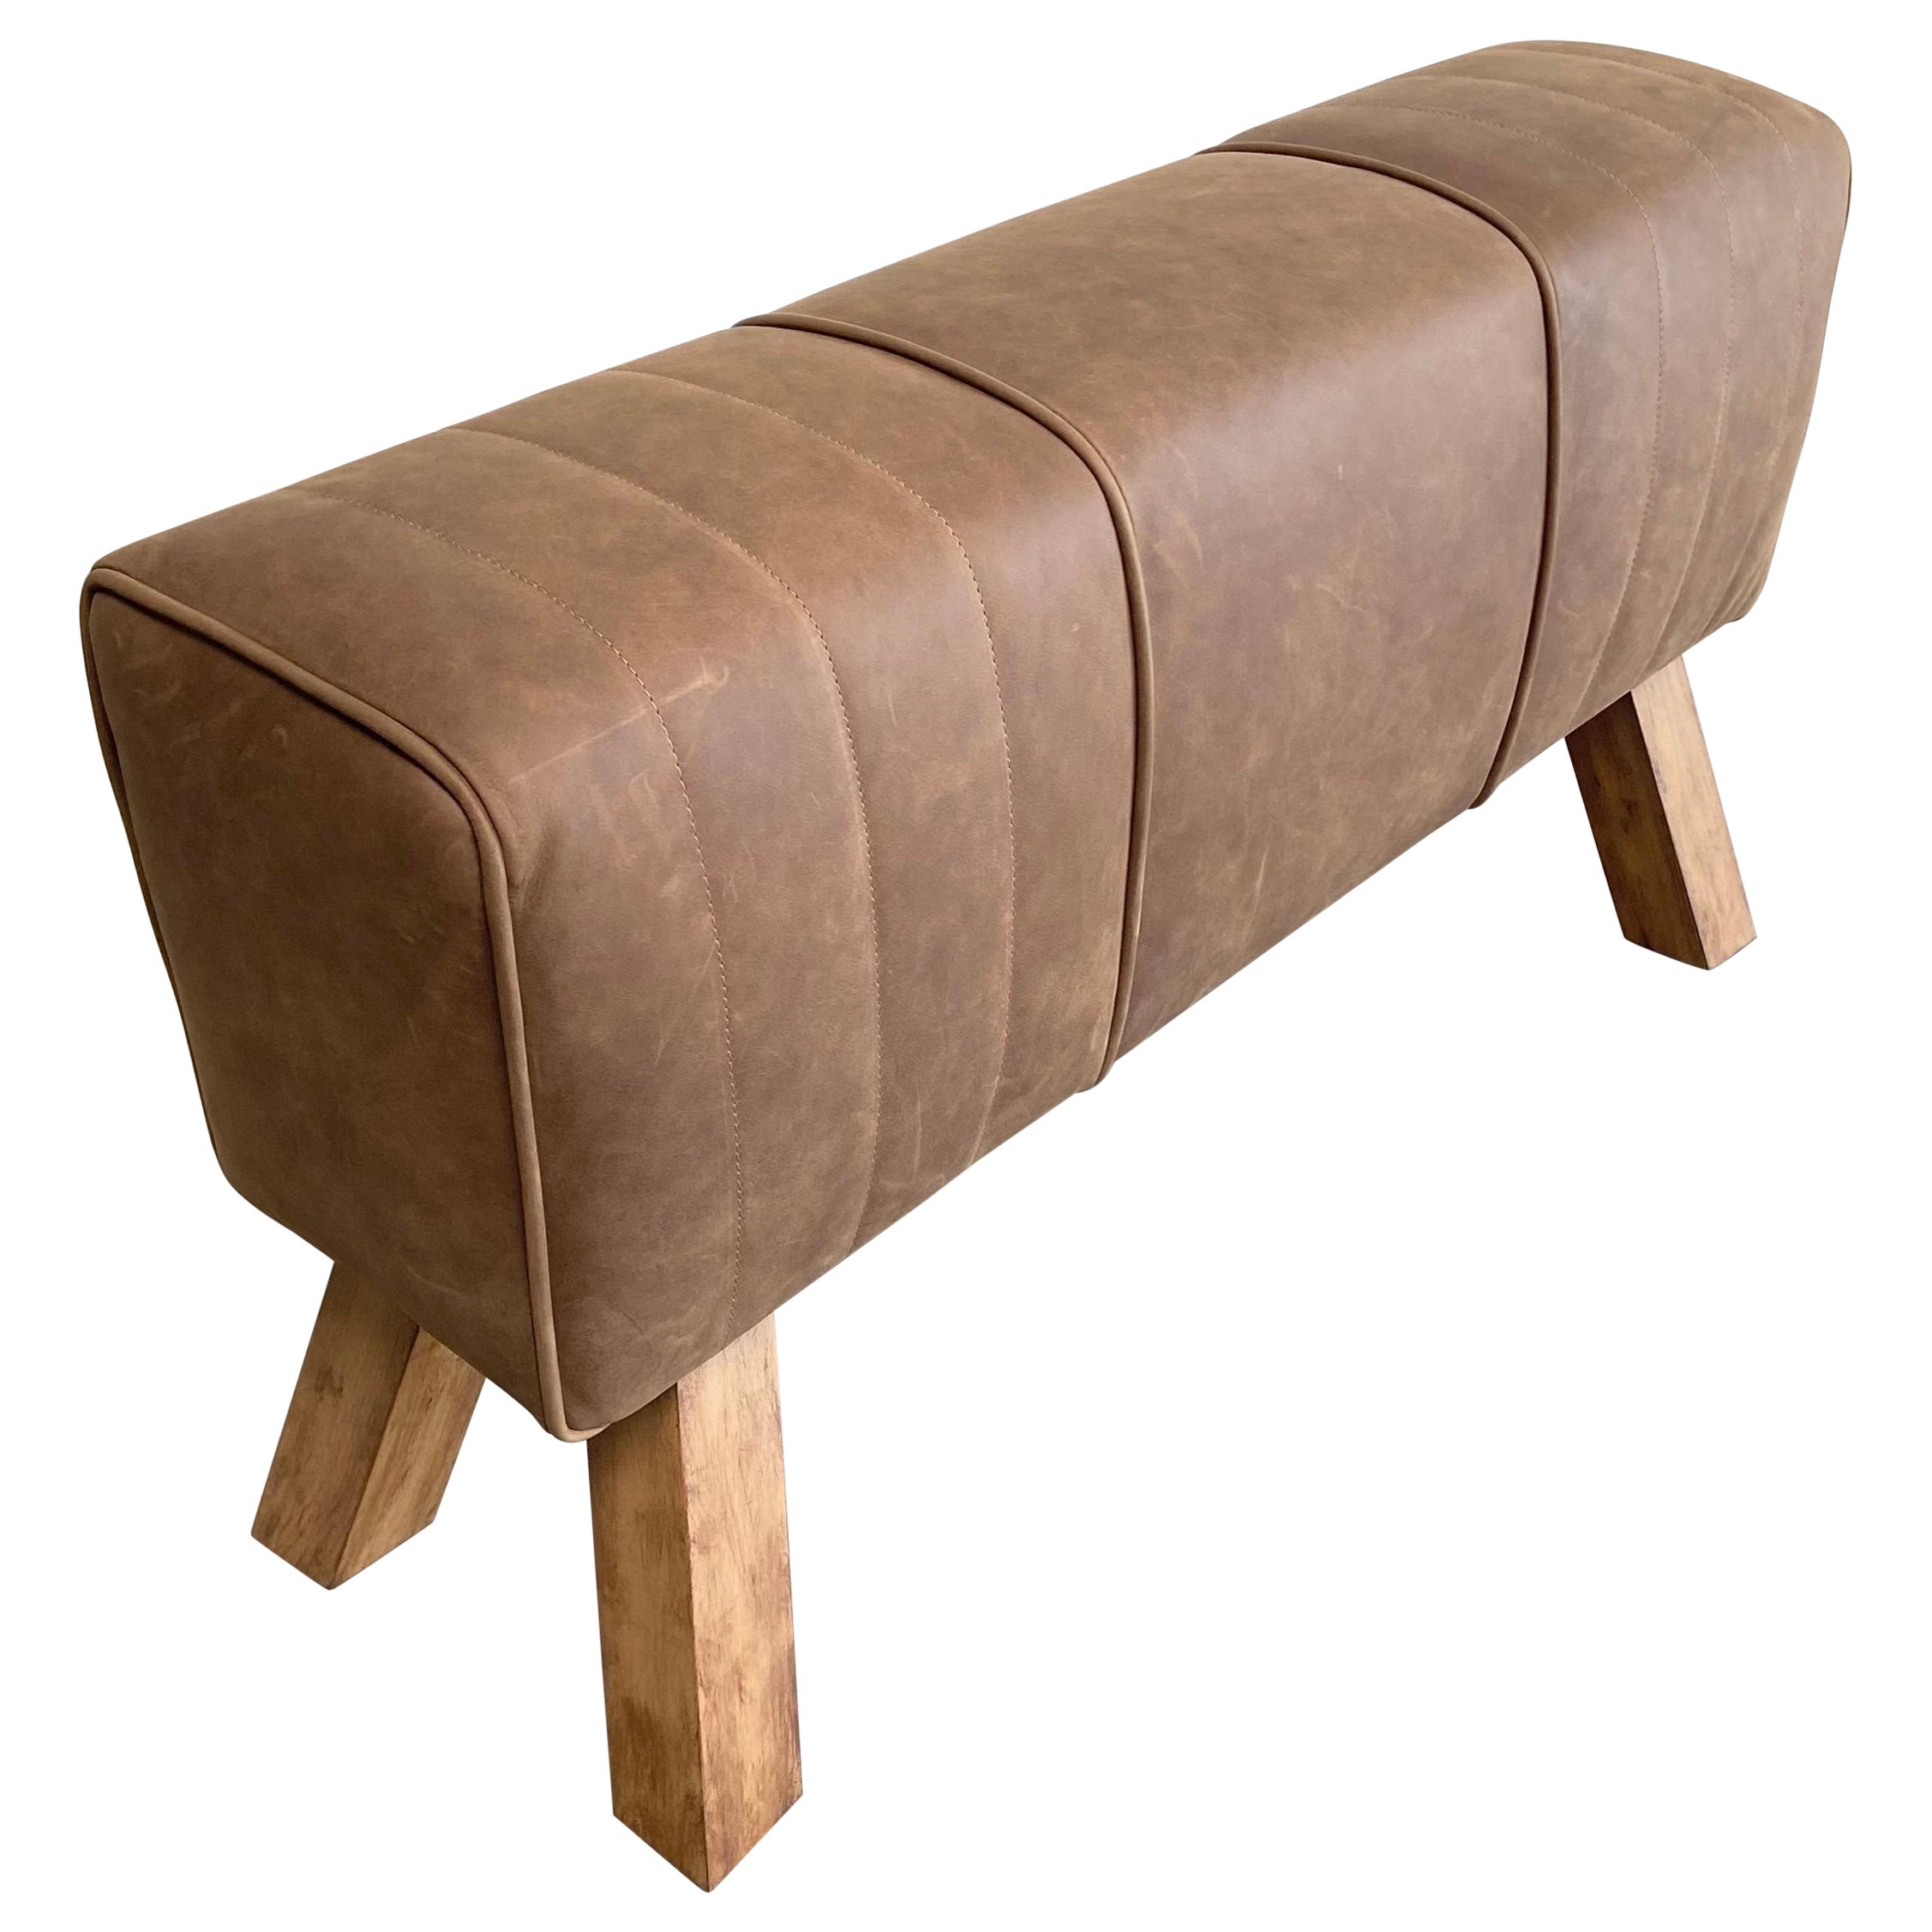 Cowhide leather Bench Stool Seat Pommel Horse foot rest 